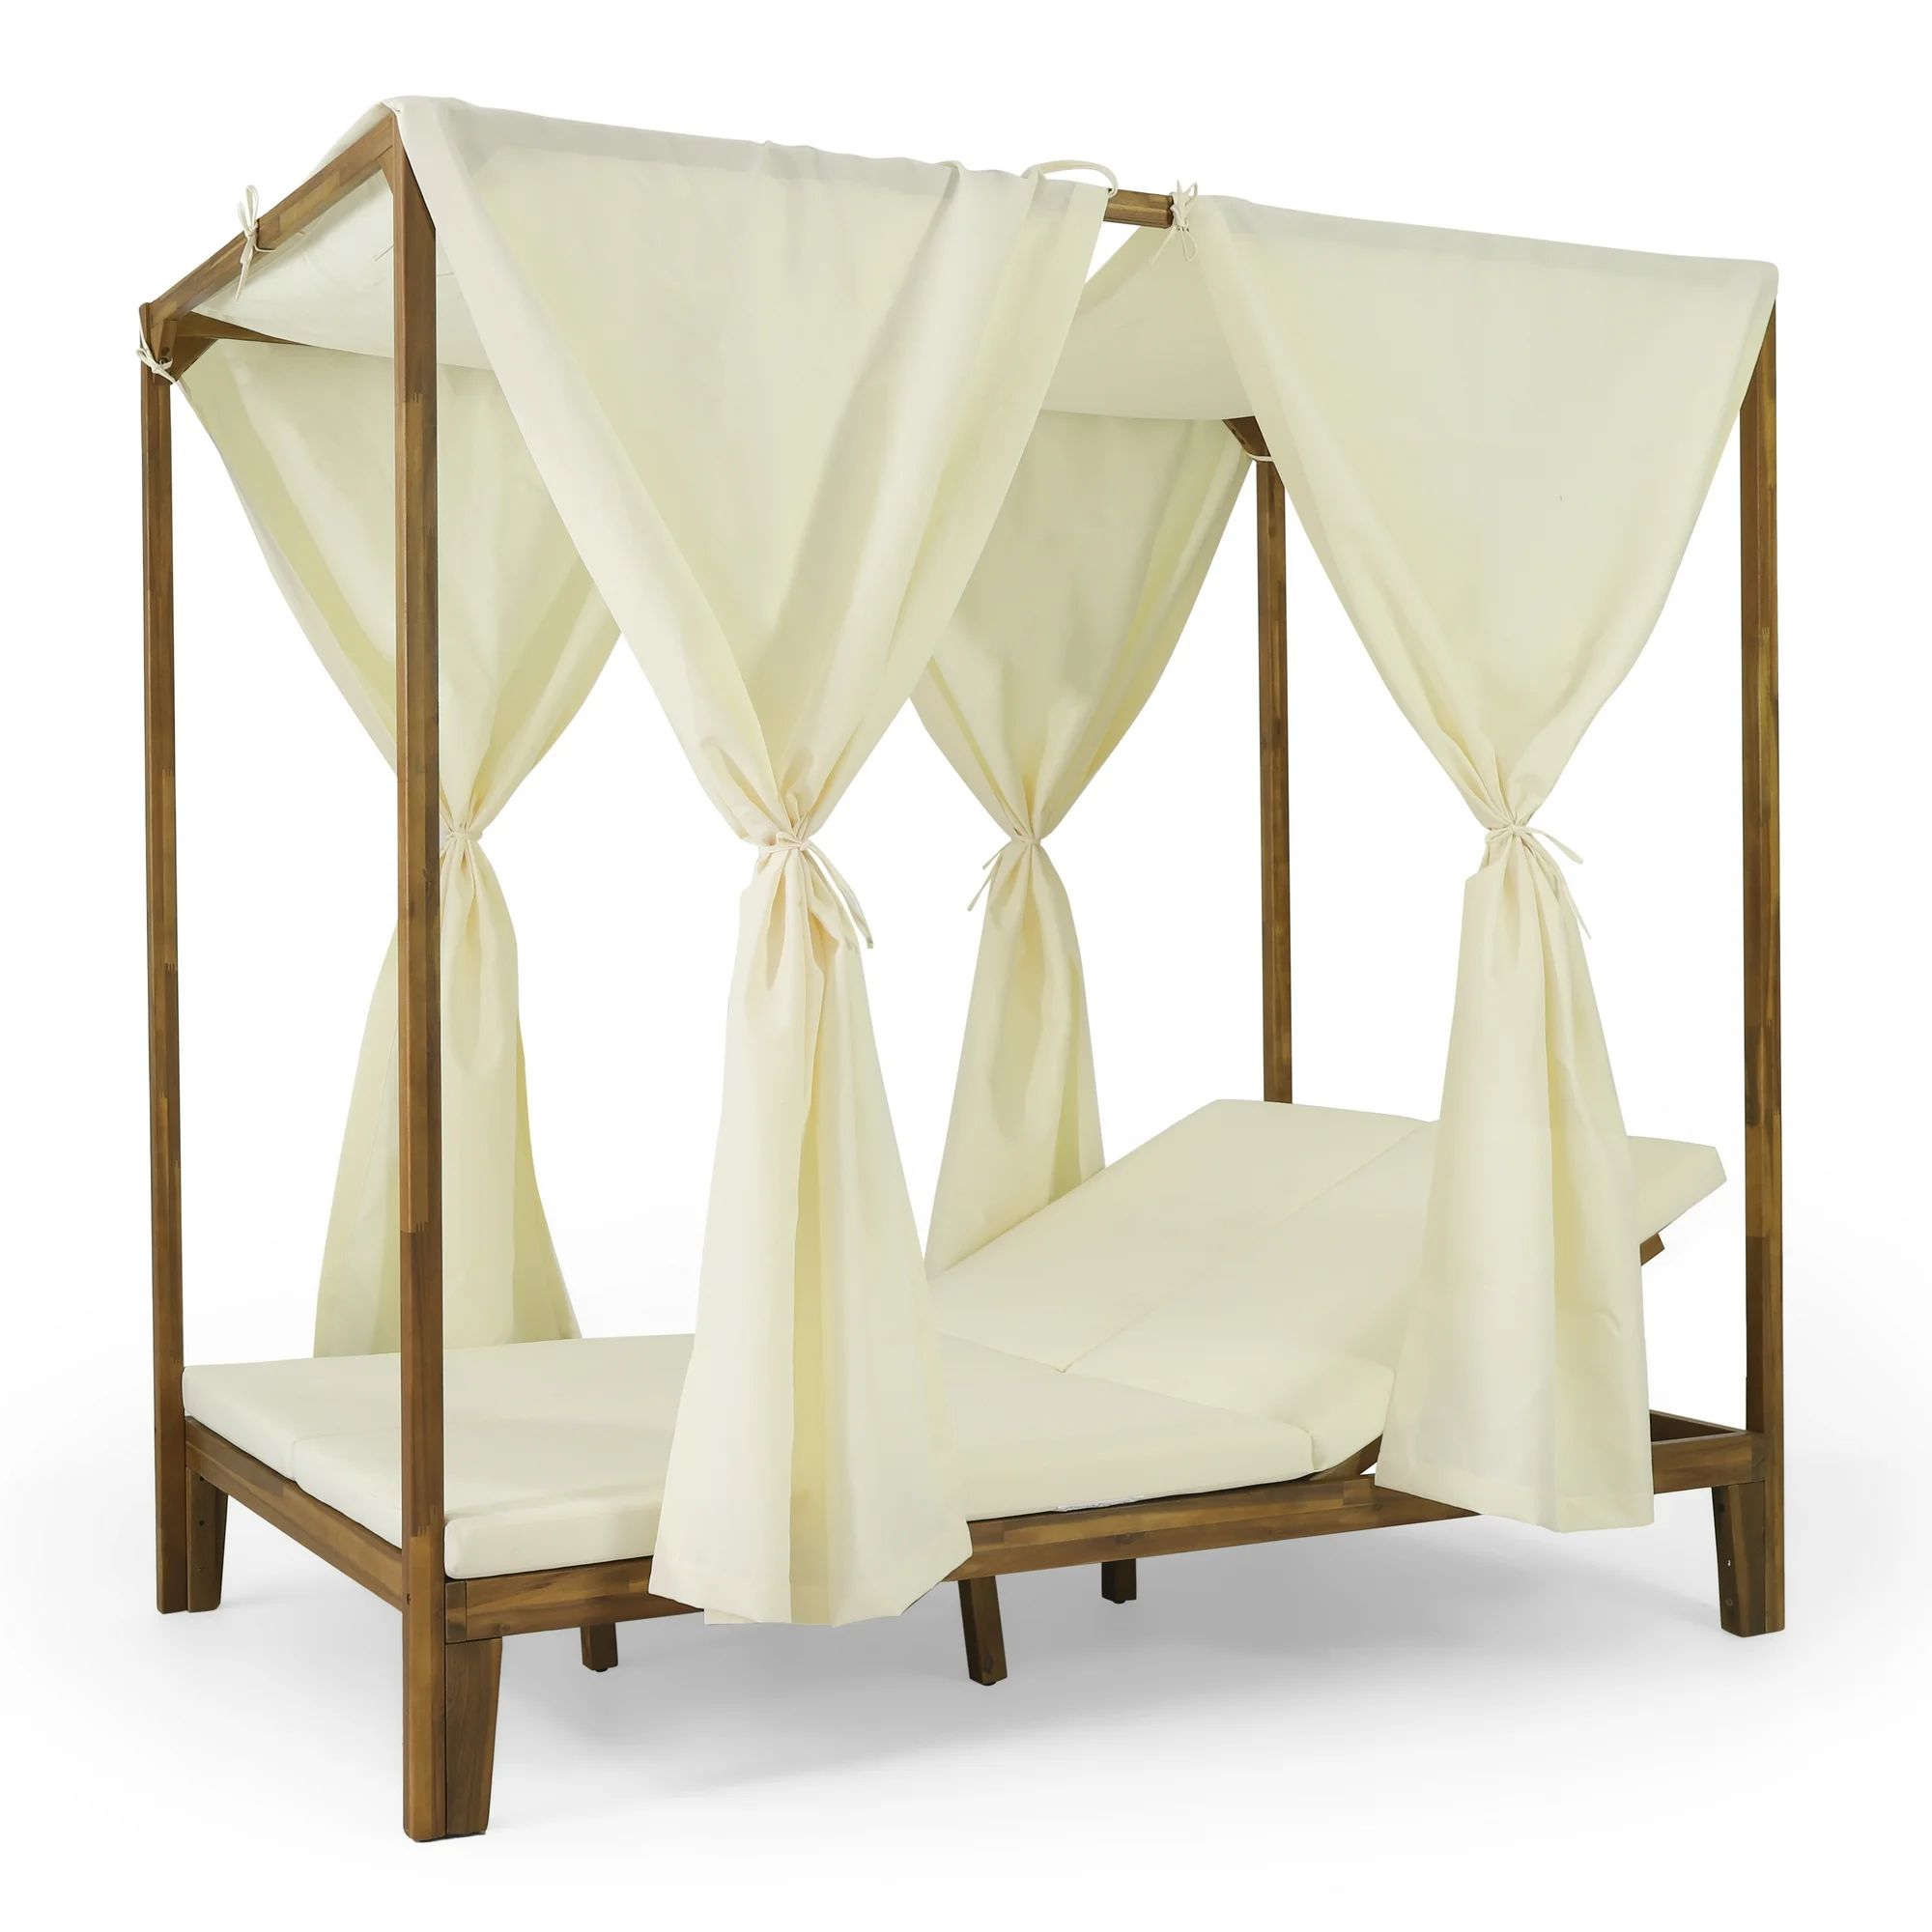 Muntz Acacia Wood Outdoor 2 Seater Adjustable Daybed with Curtains, Teak and Cream | Walmart (US)